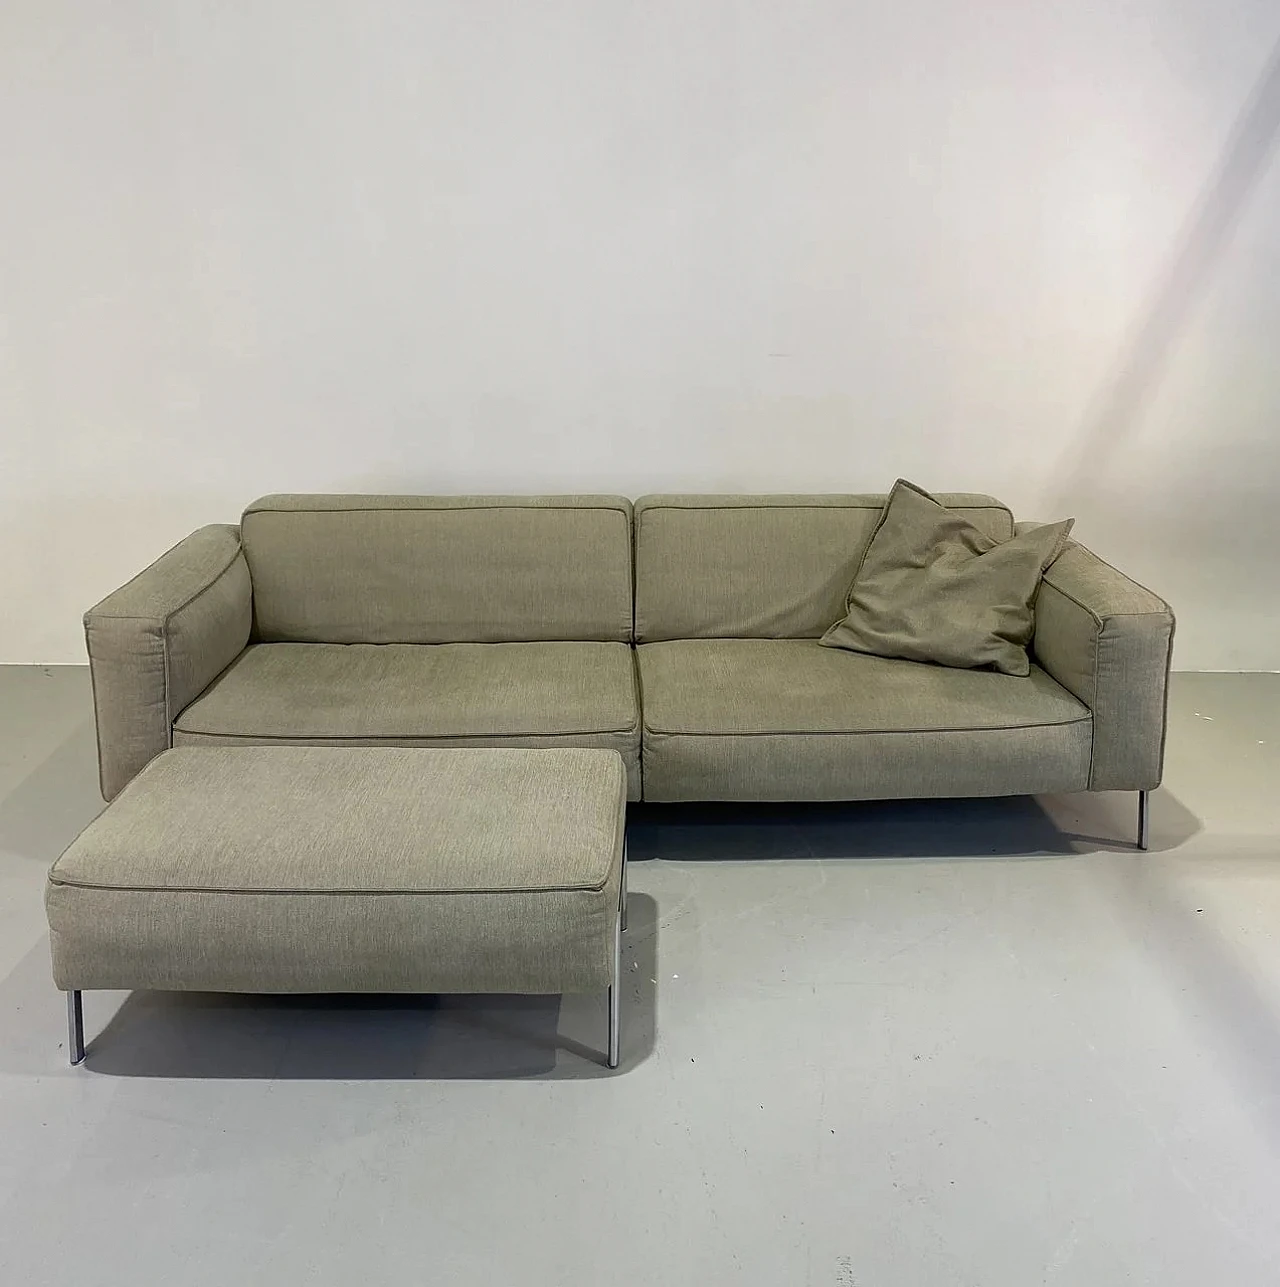 Bacio sofa and footstool by Cuno Frommherz for Rolf Benz 1